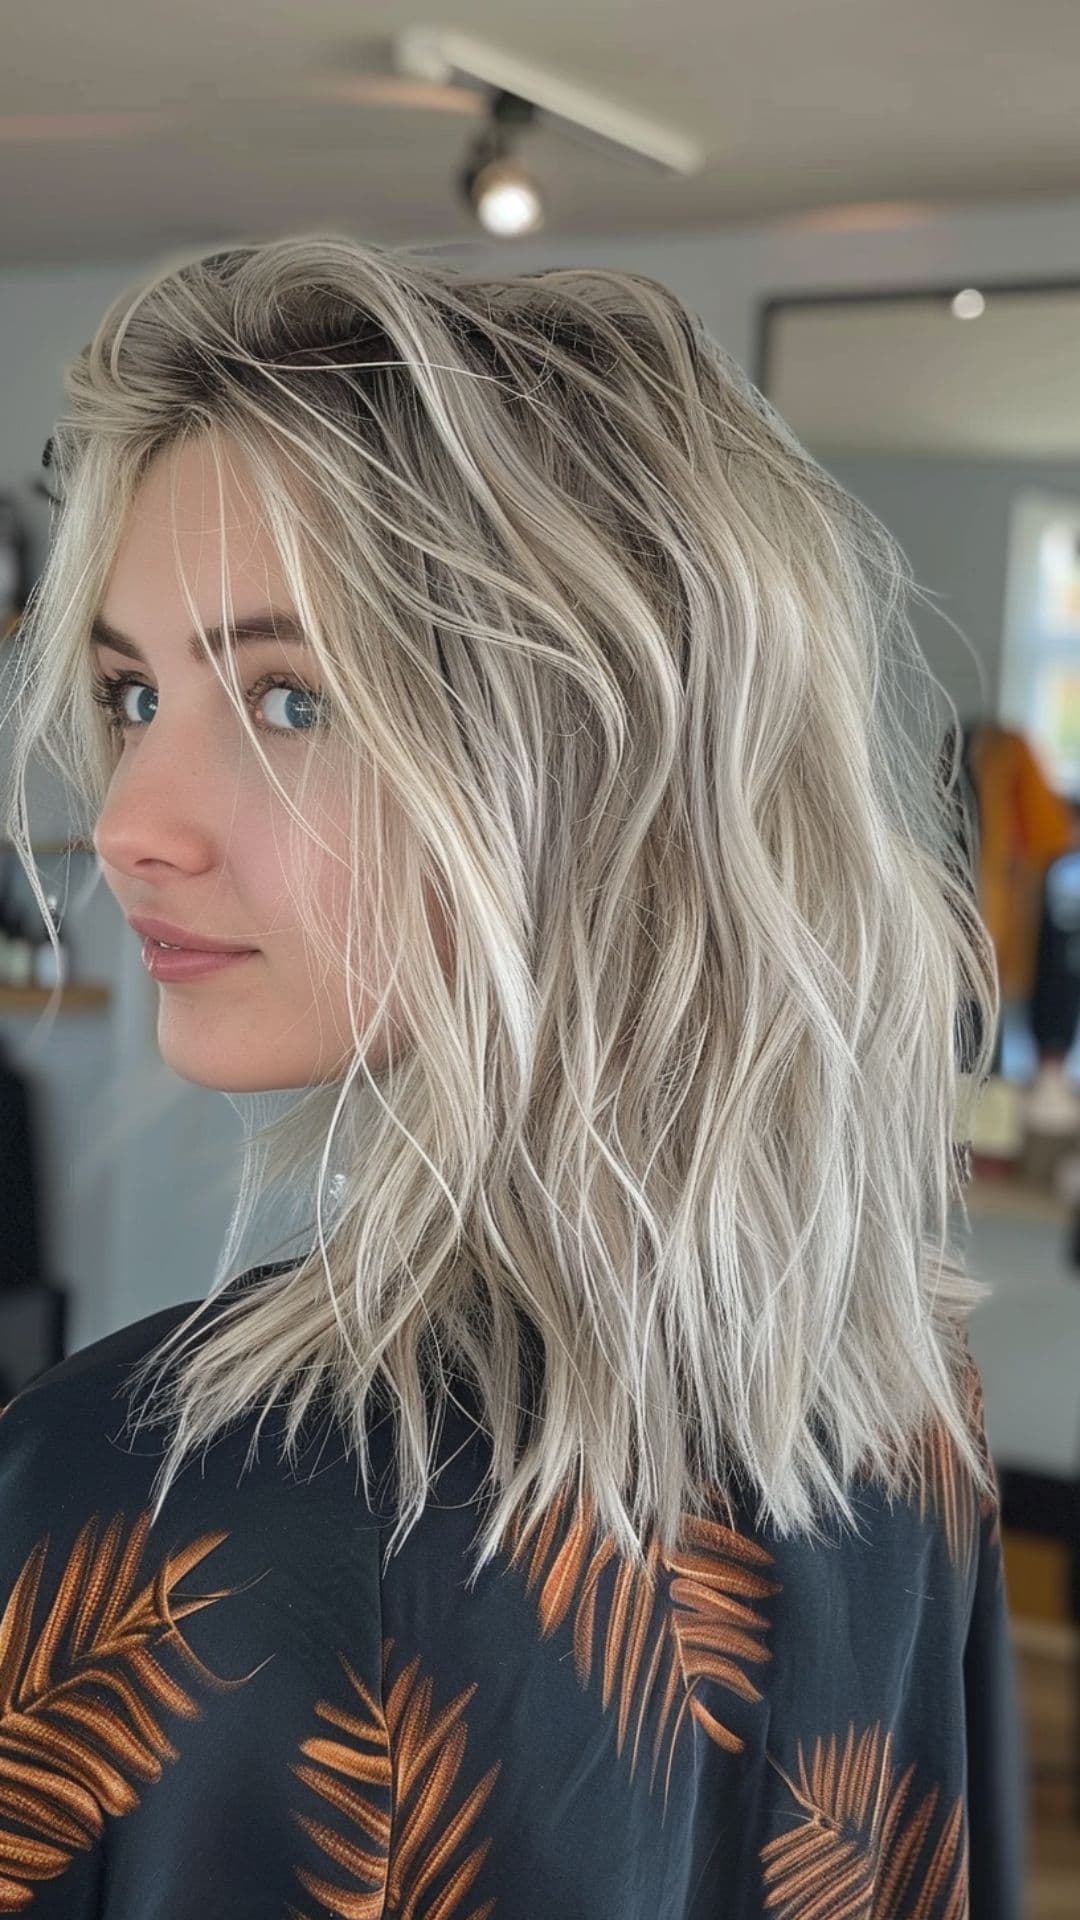 A woman modelling an icy silver highlights.